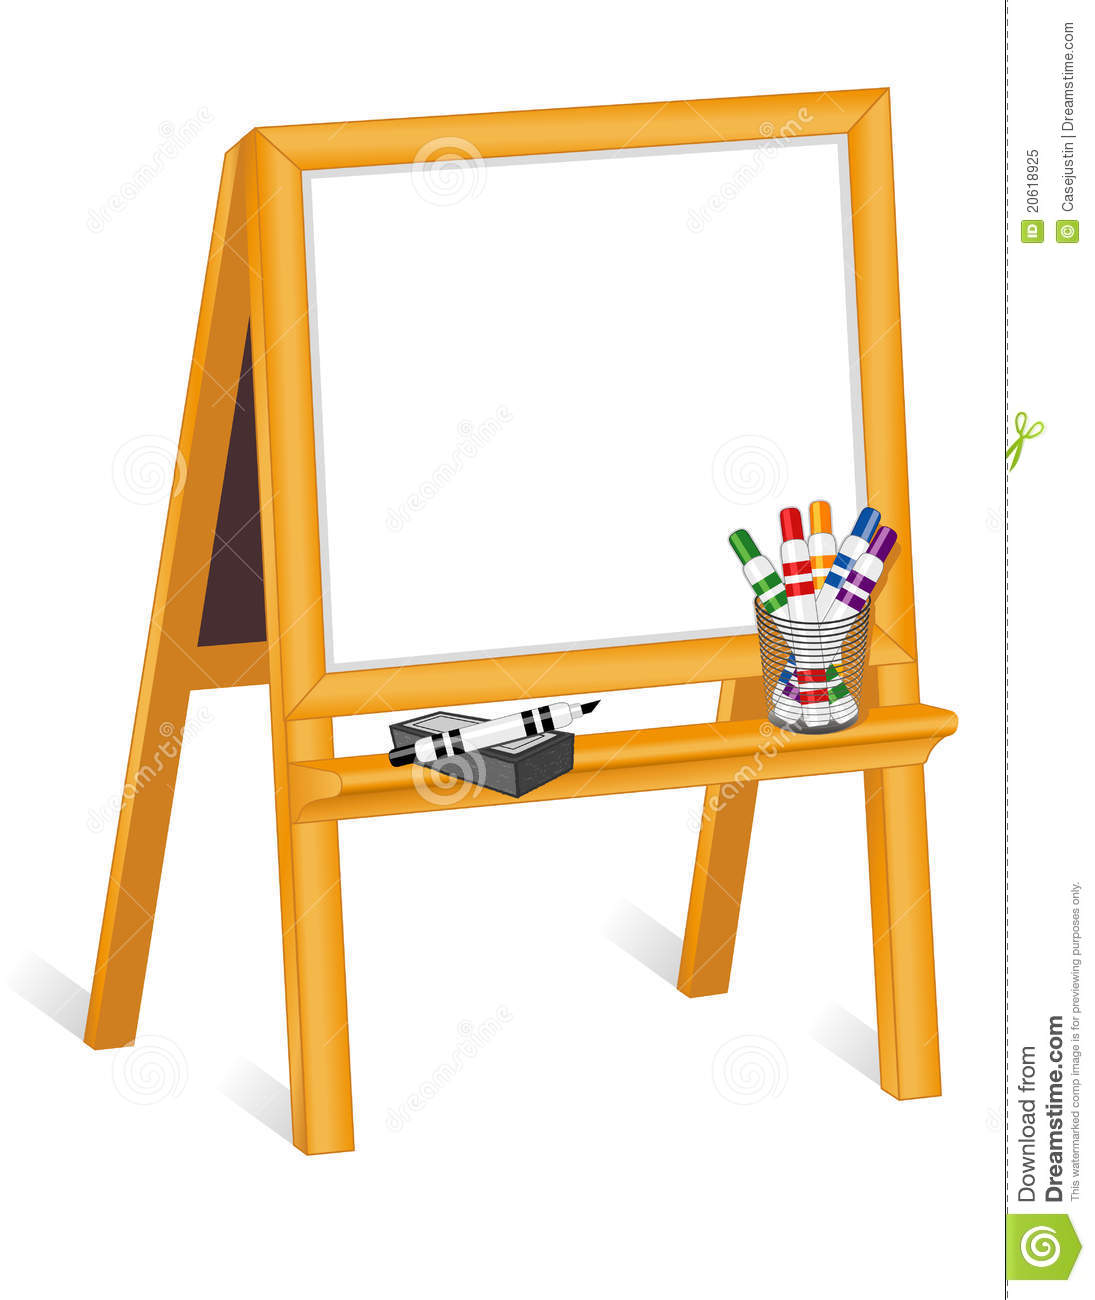 30 Easel Cliparts